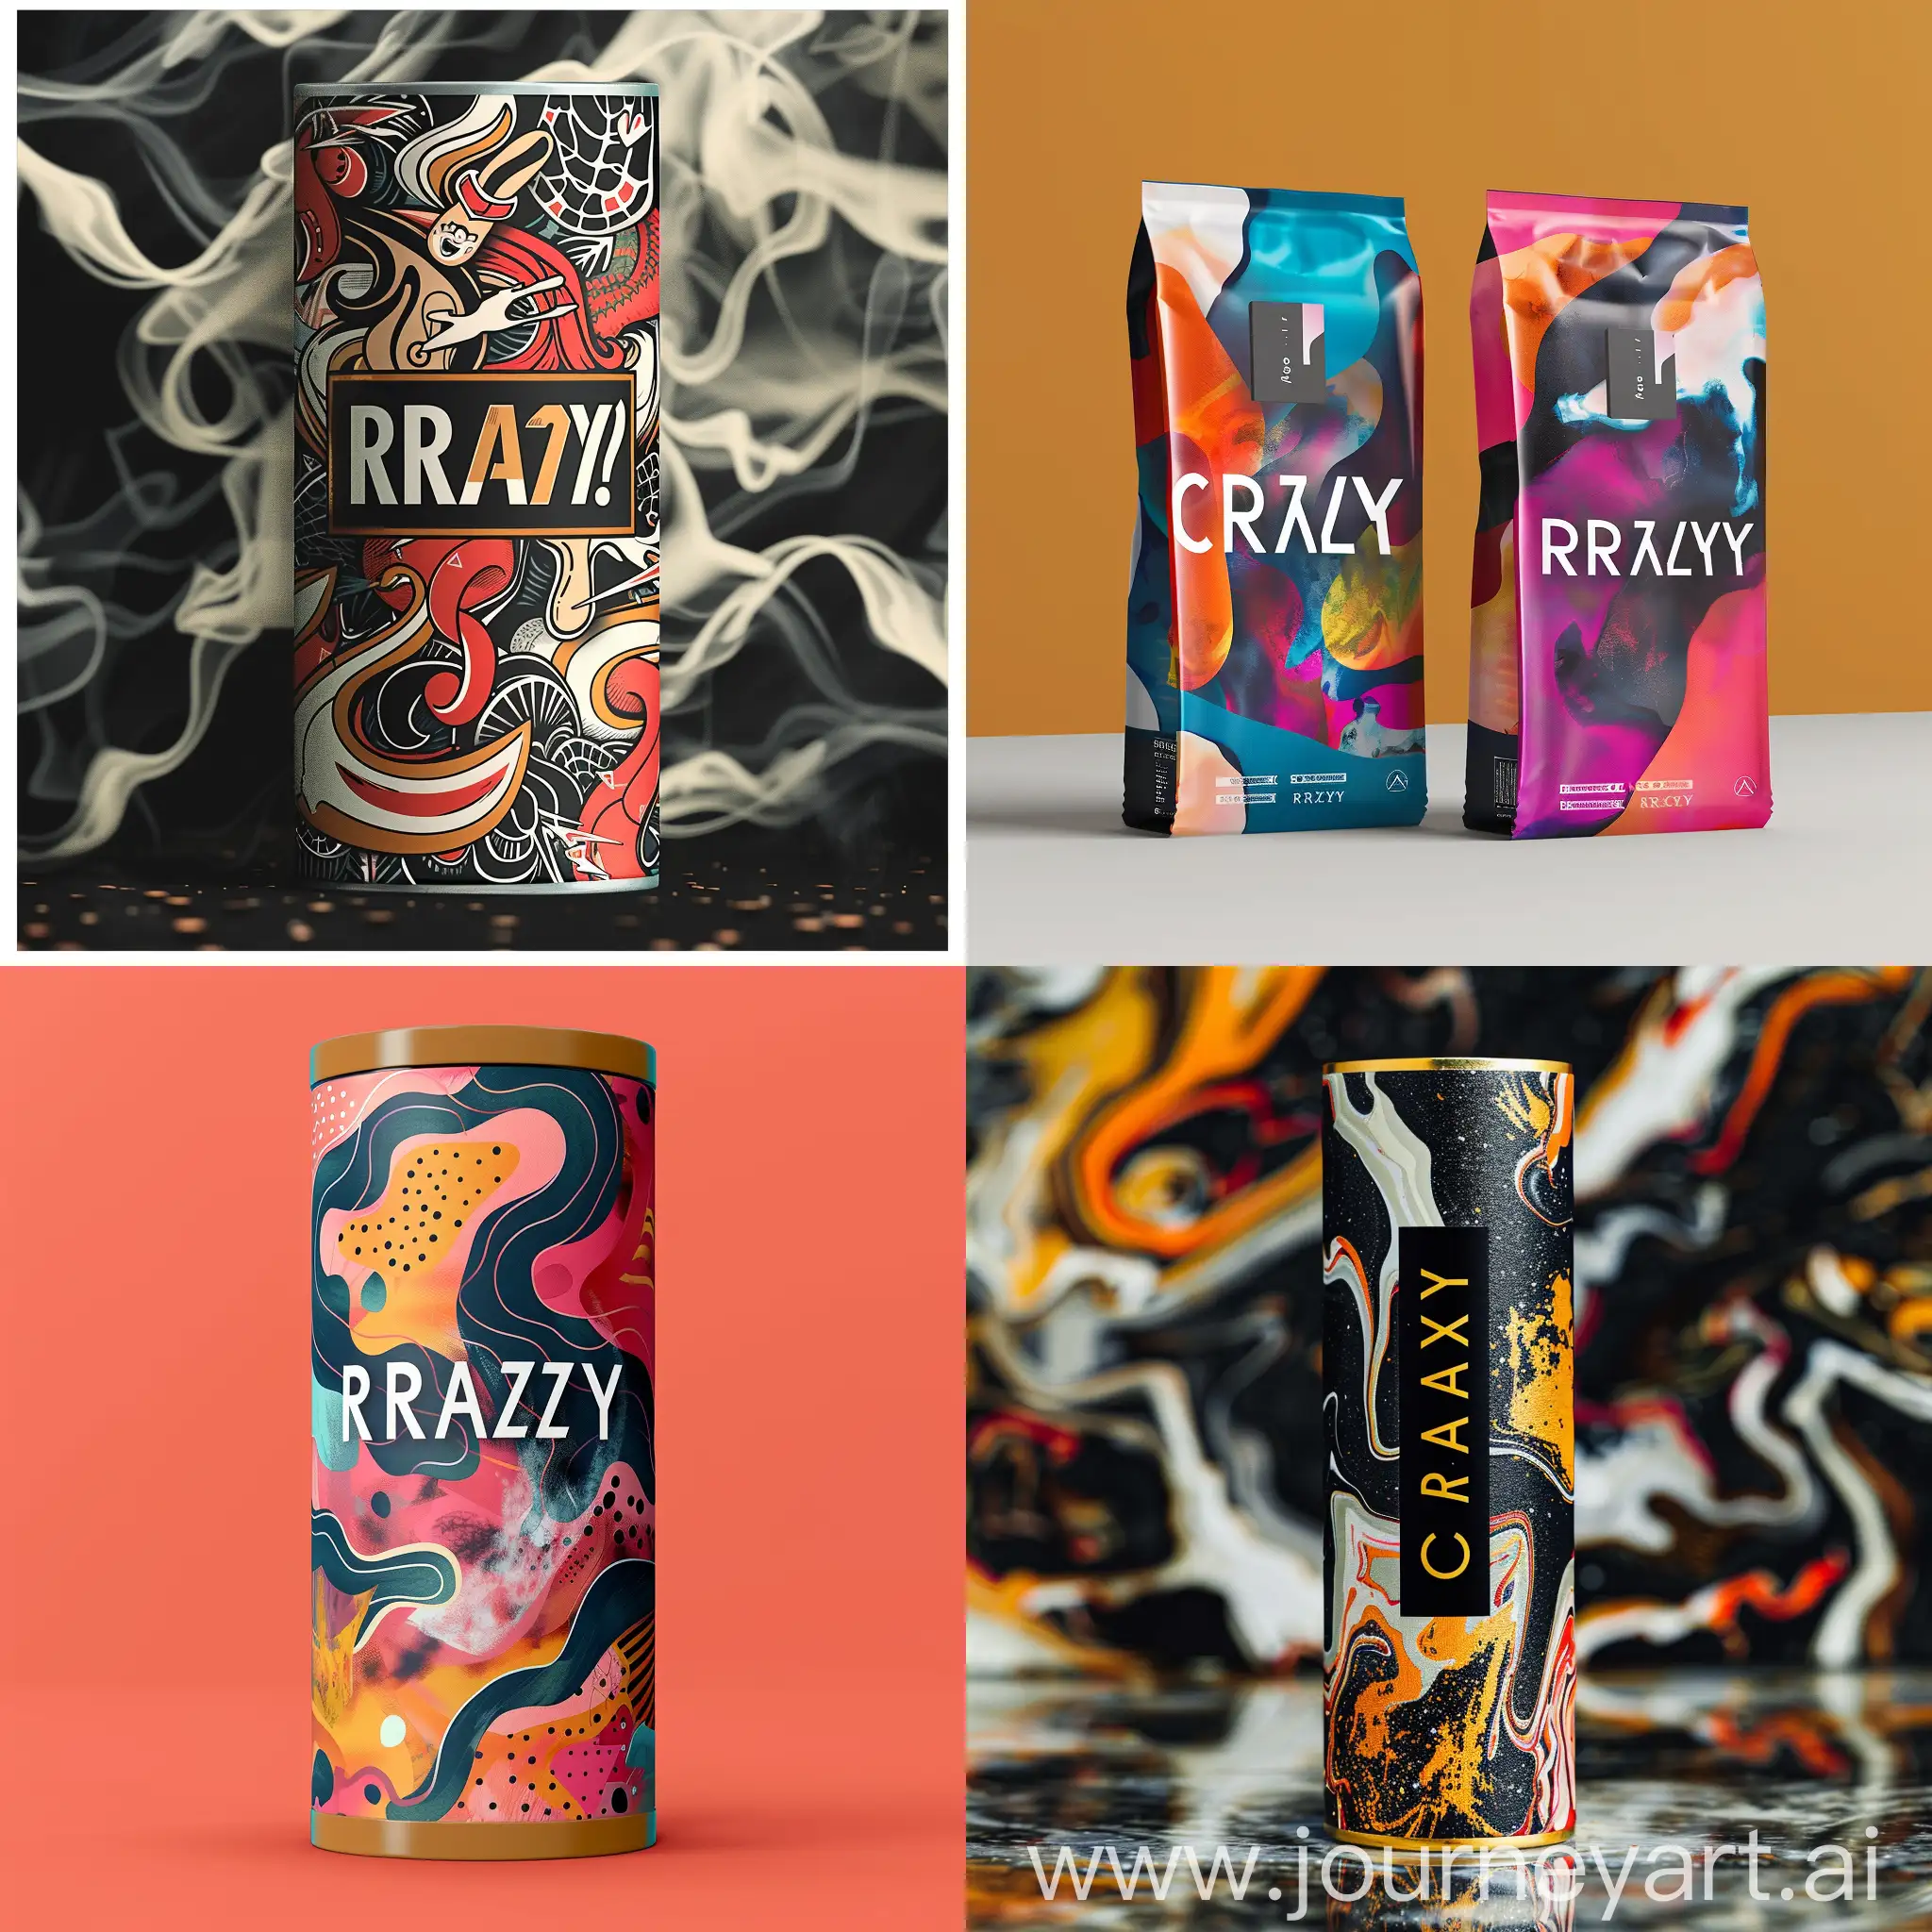 Snus label design with the name "CRAZY" in an abstract style